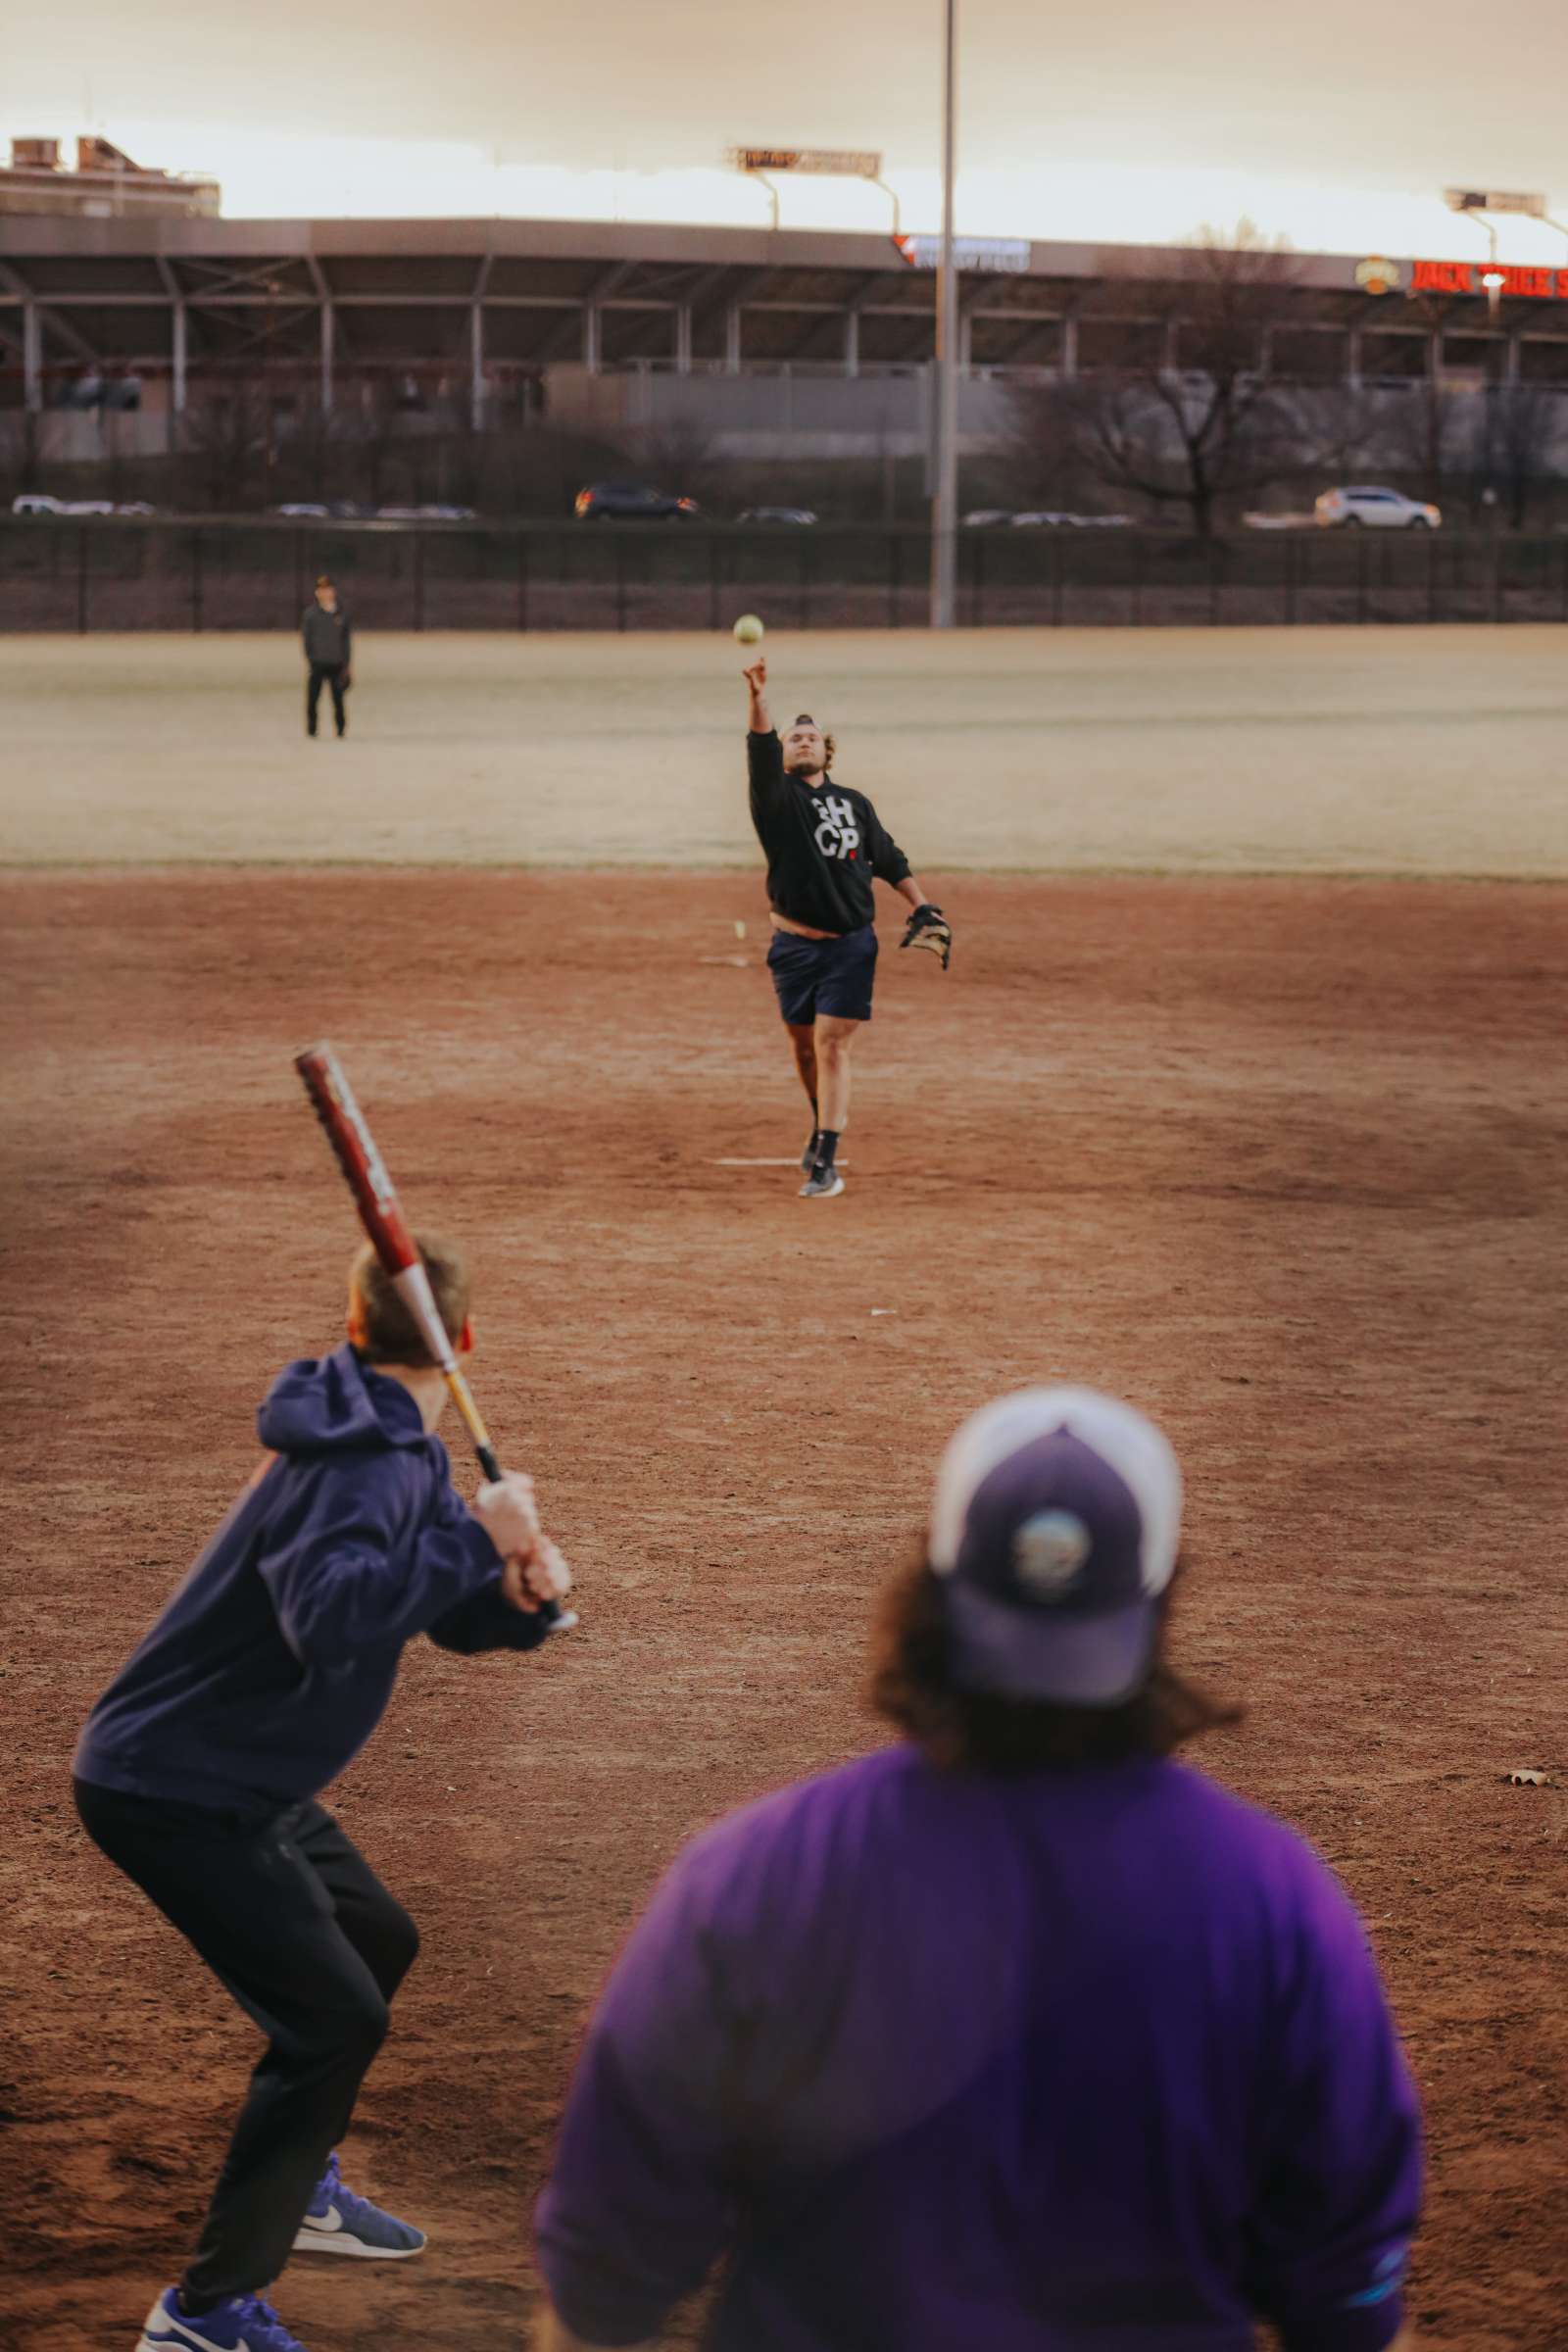 Photo of the students playing baseball